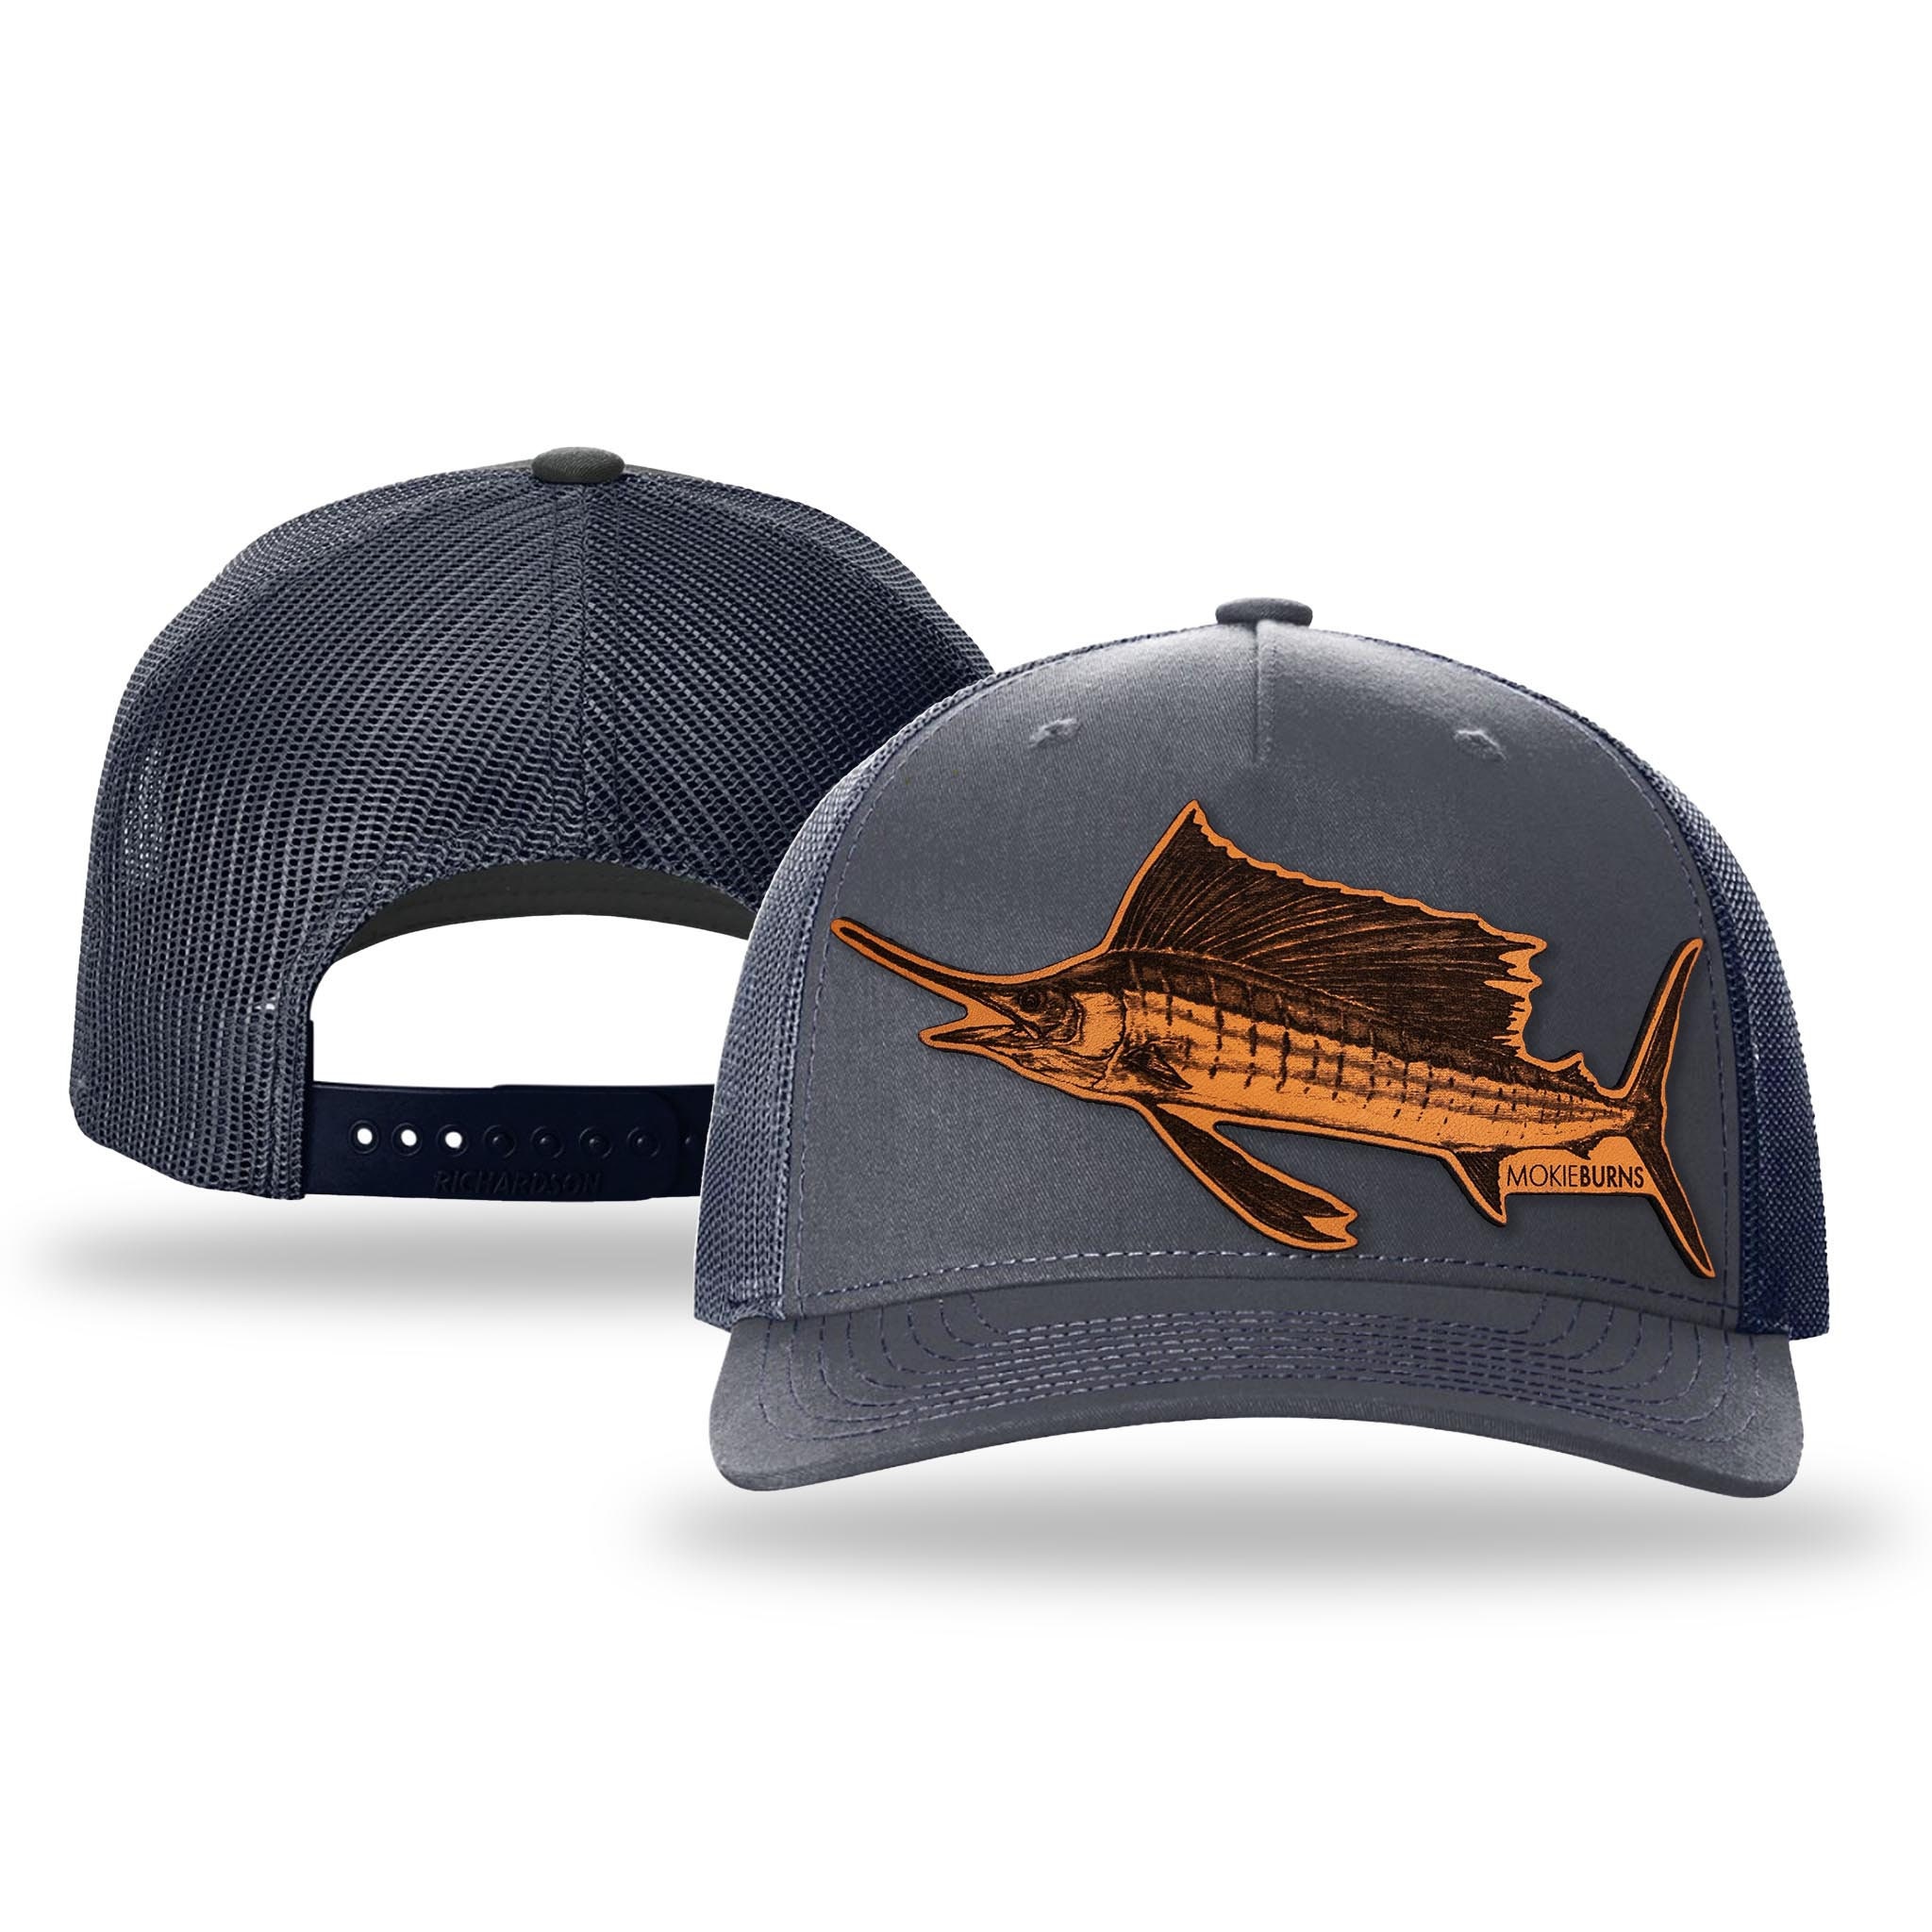 Sailfish Offshore Fishing Trucker Hat A Mokie Burns Genuine Leather Patch  Hat, Unique Pelagic Fishing Gift for Man, Fathers Day Gift Cap -  Canada